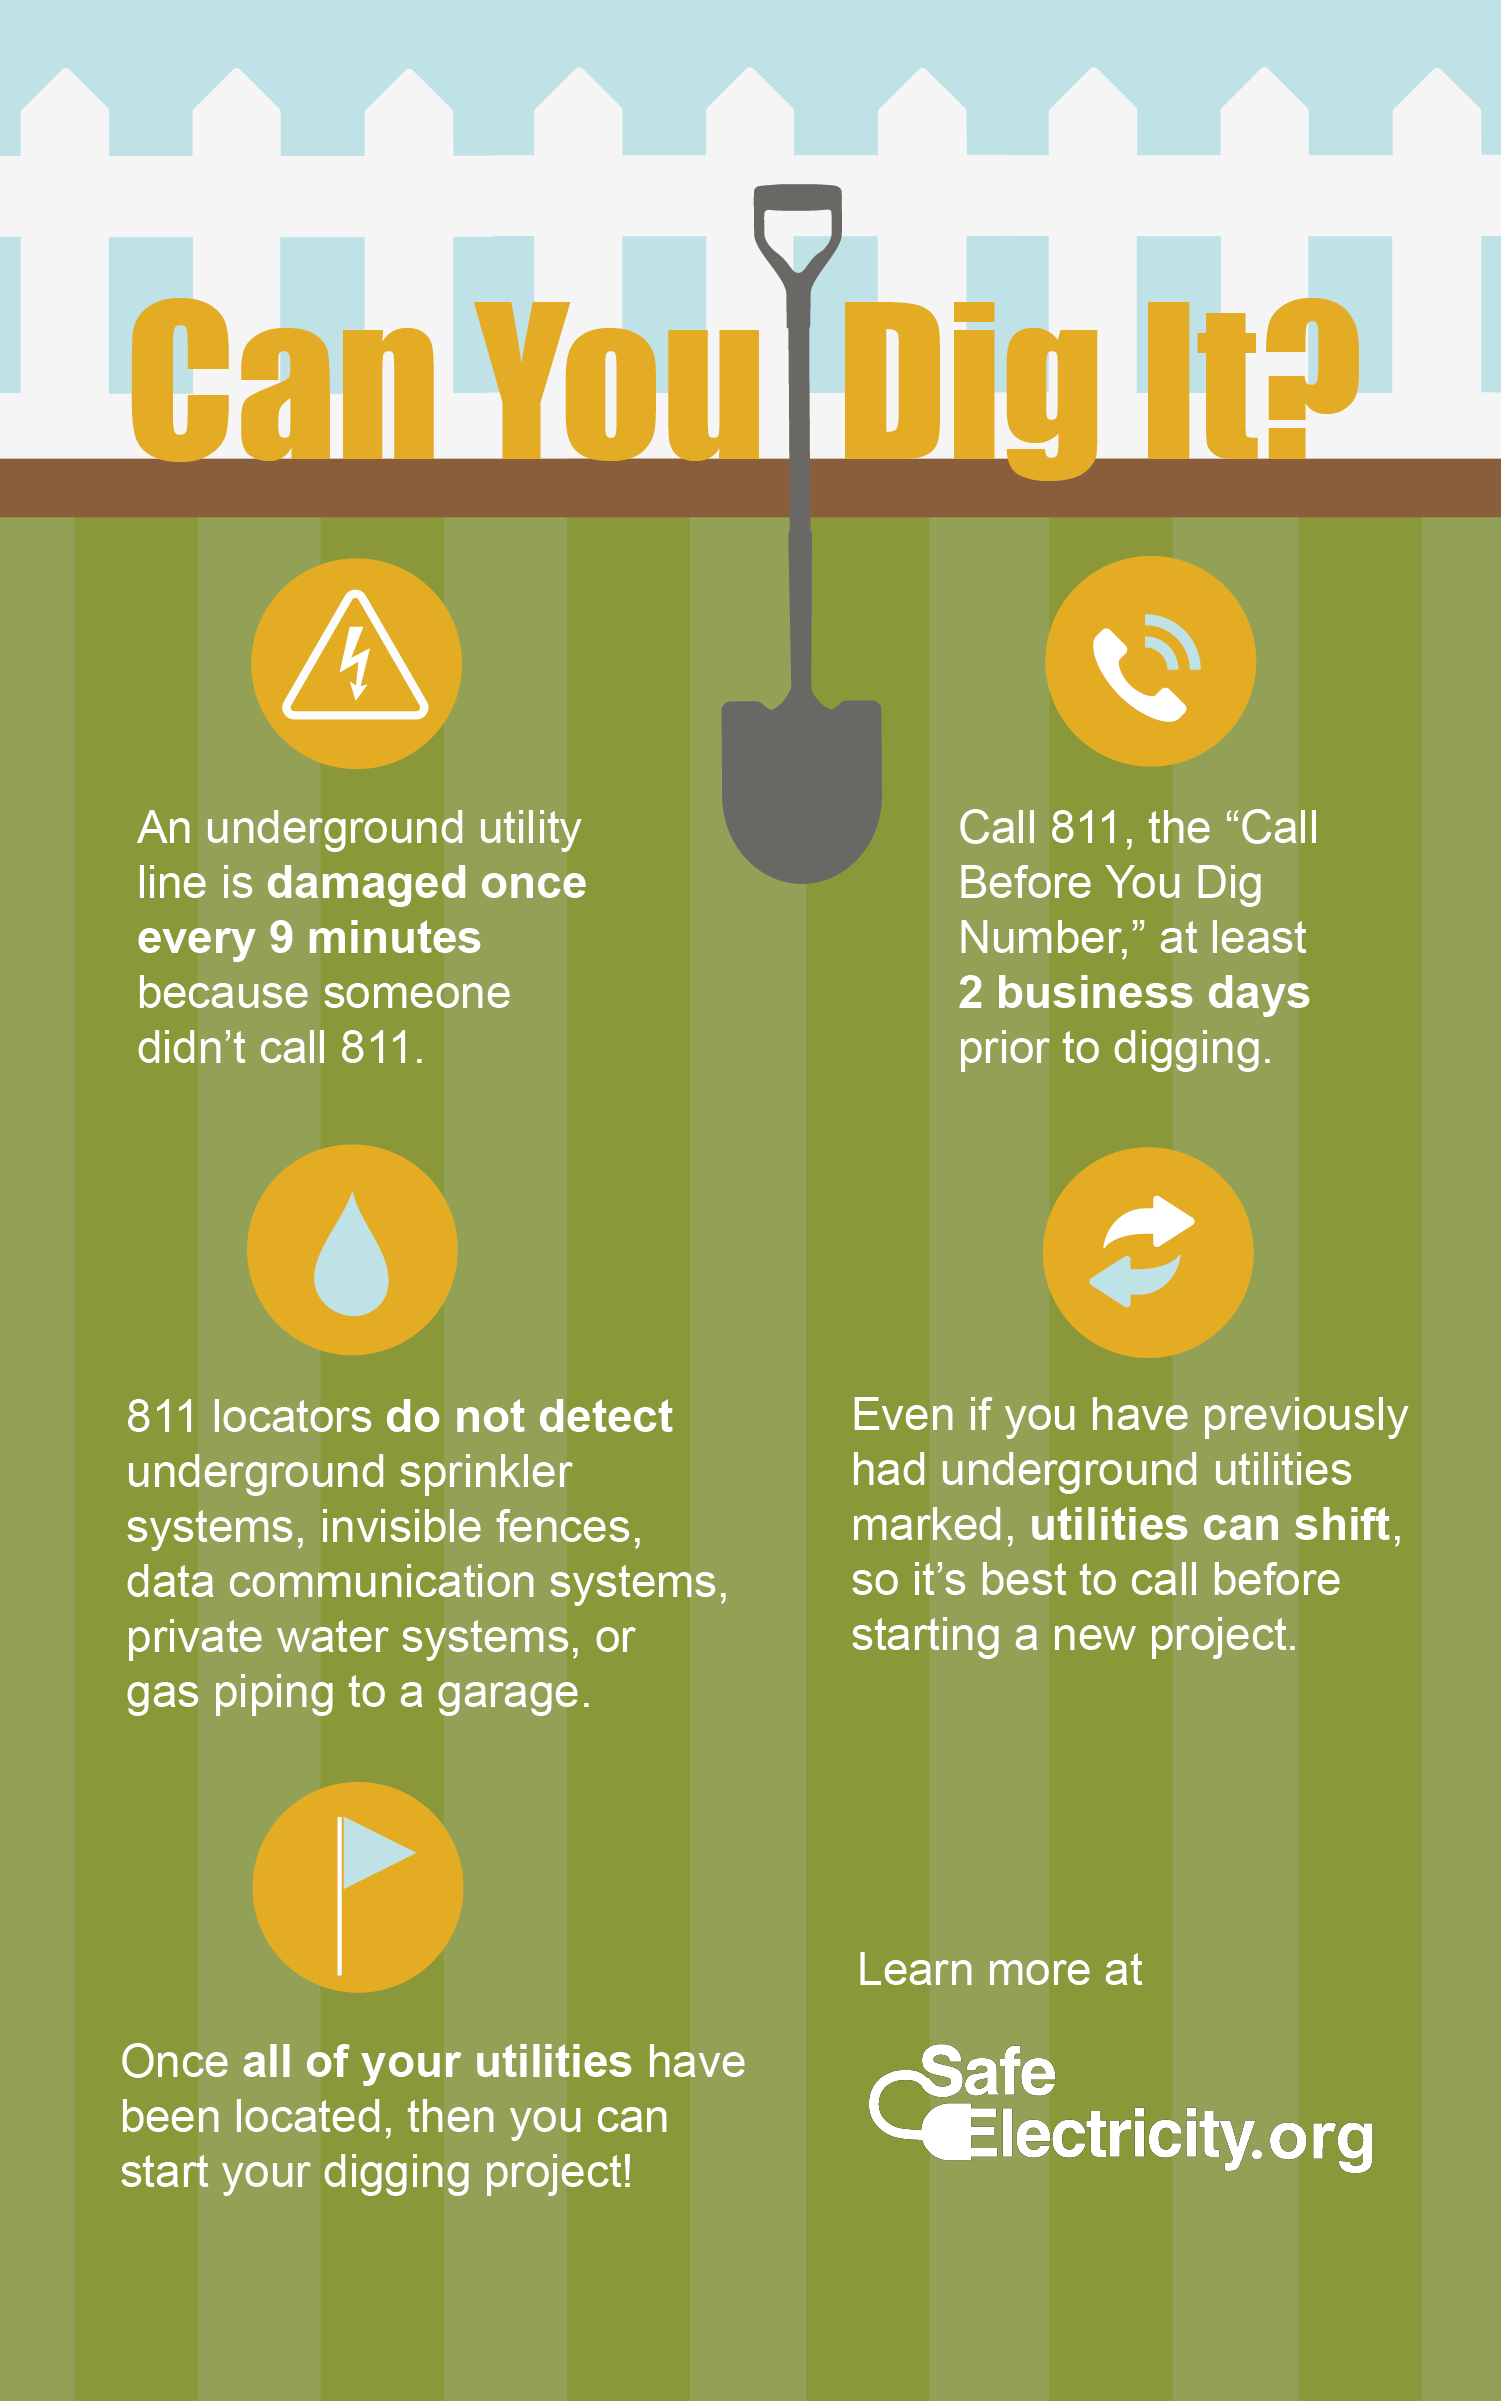 Diggers Hotline information - call 811 before you dig